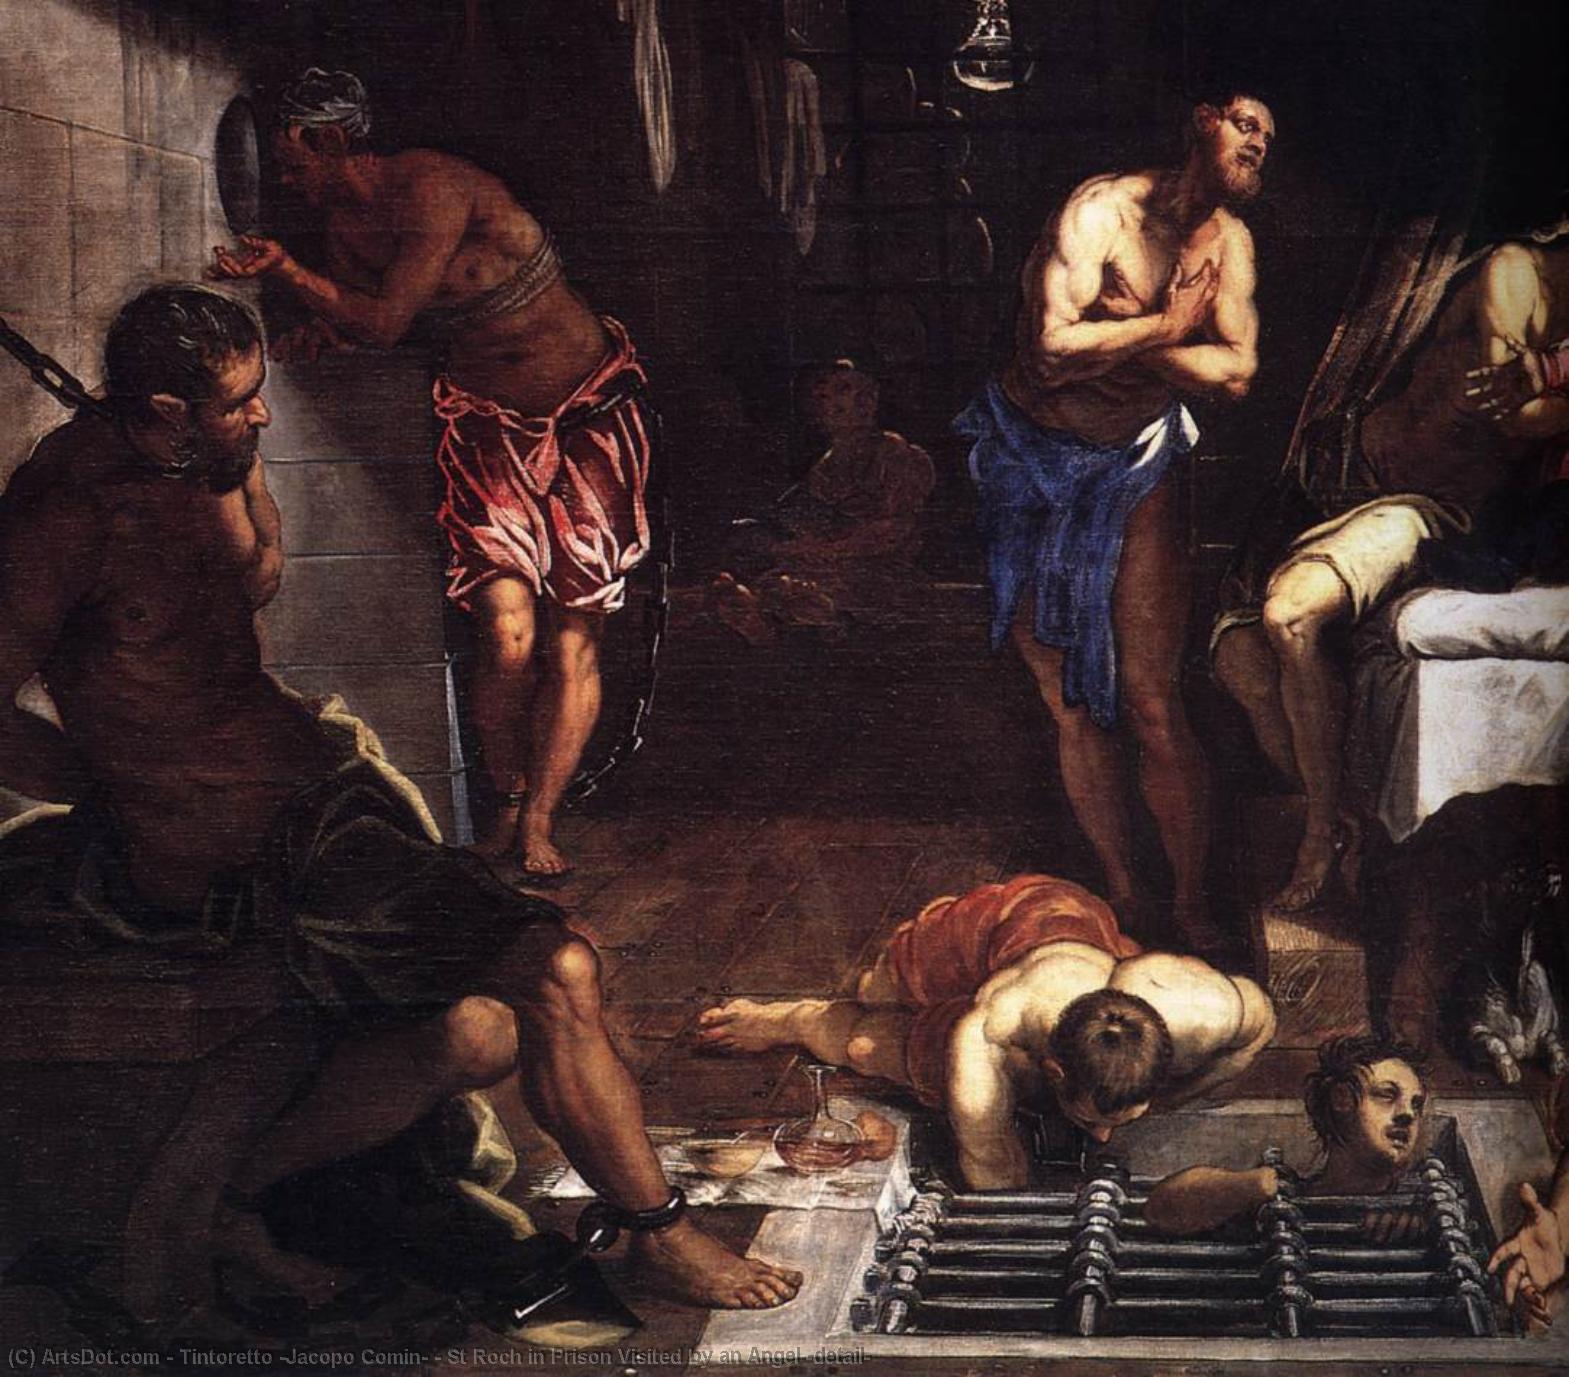 Wikioo.org - สารานุกรมวิจิตรศิลป์ - จิตรกรรม Tintoretto (Jacopo Comin) - St Roch in Prison Visited by an Angel (detail)